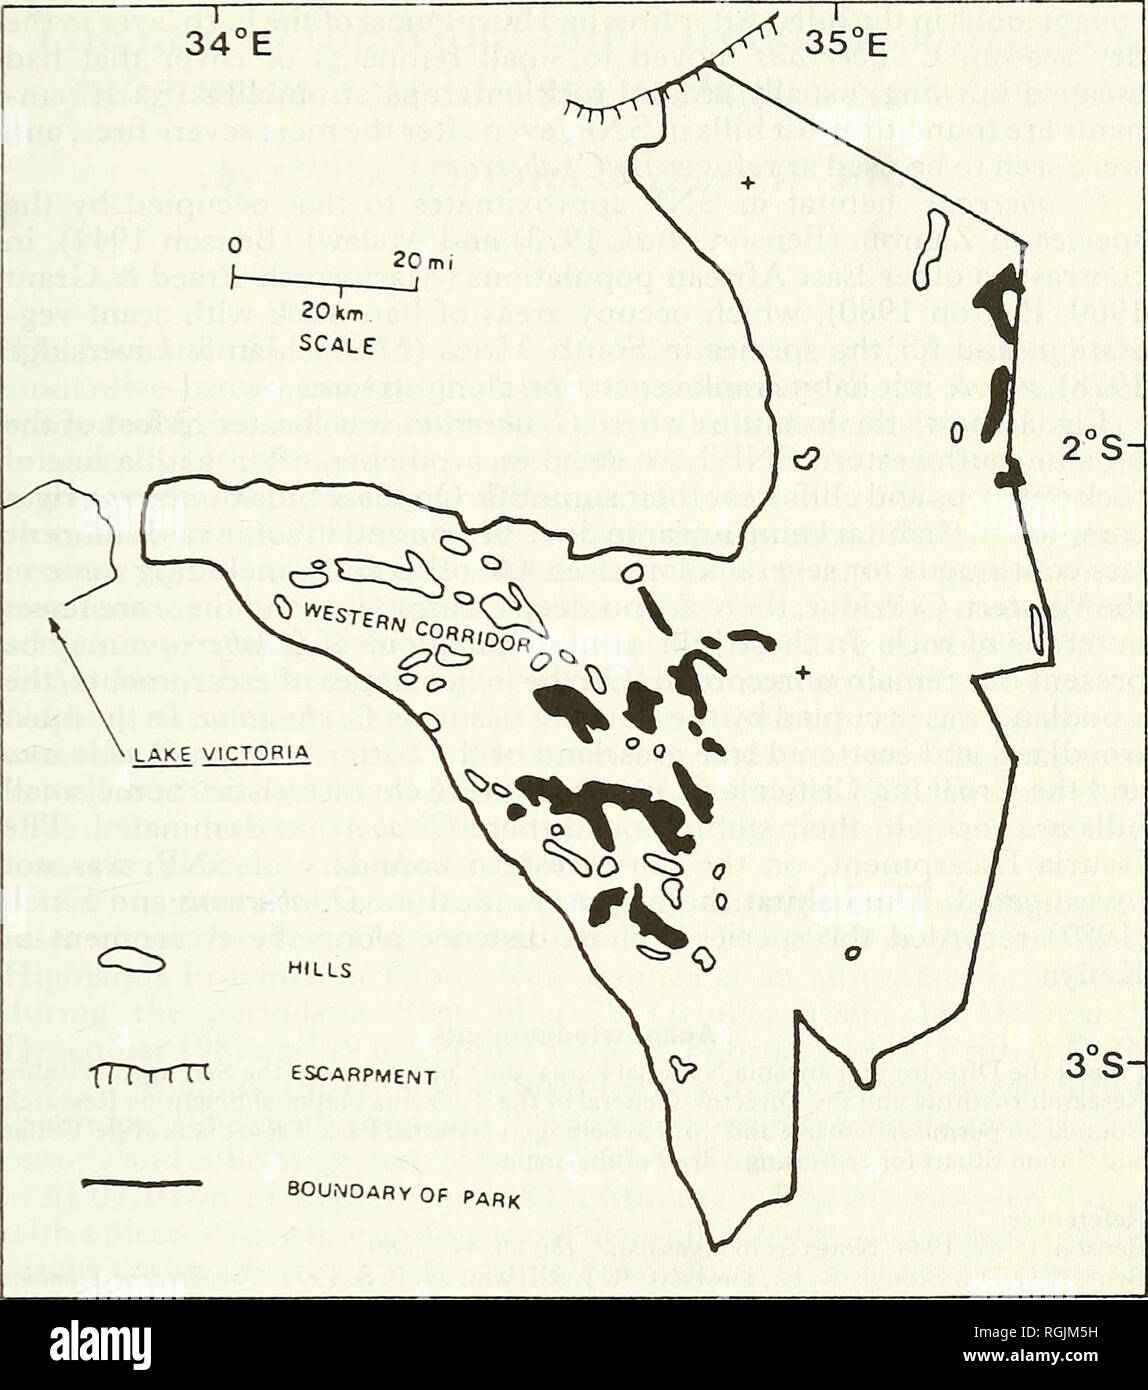 . Bulletin of the British Ornithologists' Club. Birds. A*. Stronach 33 Bull.B.O.C. 1990 110(1;. Fig. 1. Map of Serengeti National Park, showing the distribution of hills. Hills on which C. aberrans was recorded are shaded black. Kopjes on which C. aberrans was recorded are marked +. Near Seronera C. aberrans was found on kopjes with steep screes of large boulders. Tall Loudetia grew between the boulders but there were few bushes or trees. In northwestern SNP C. aberrans occupied kopjes on ridgetops, with tall Loudetia and Hyperihelia dissoluta growing thickly between the large boulders at thei Stock Photo